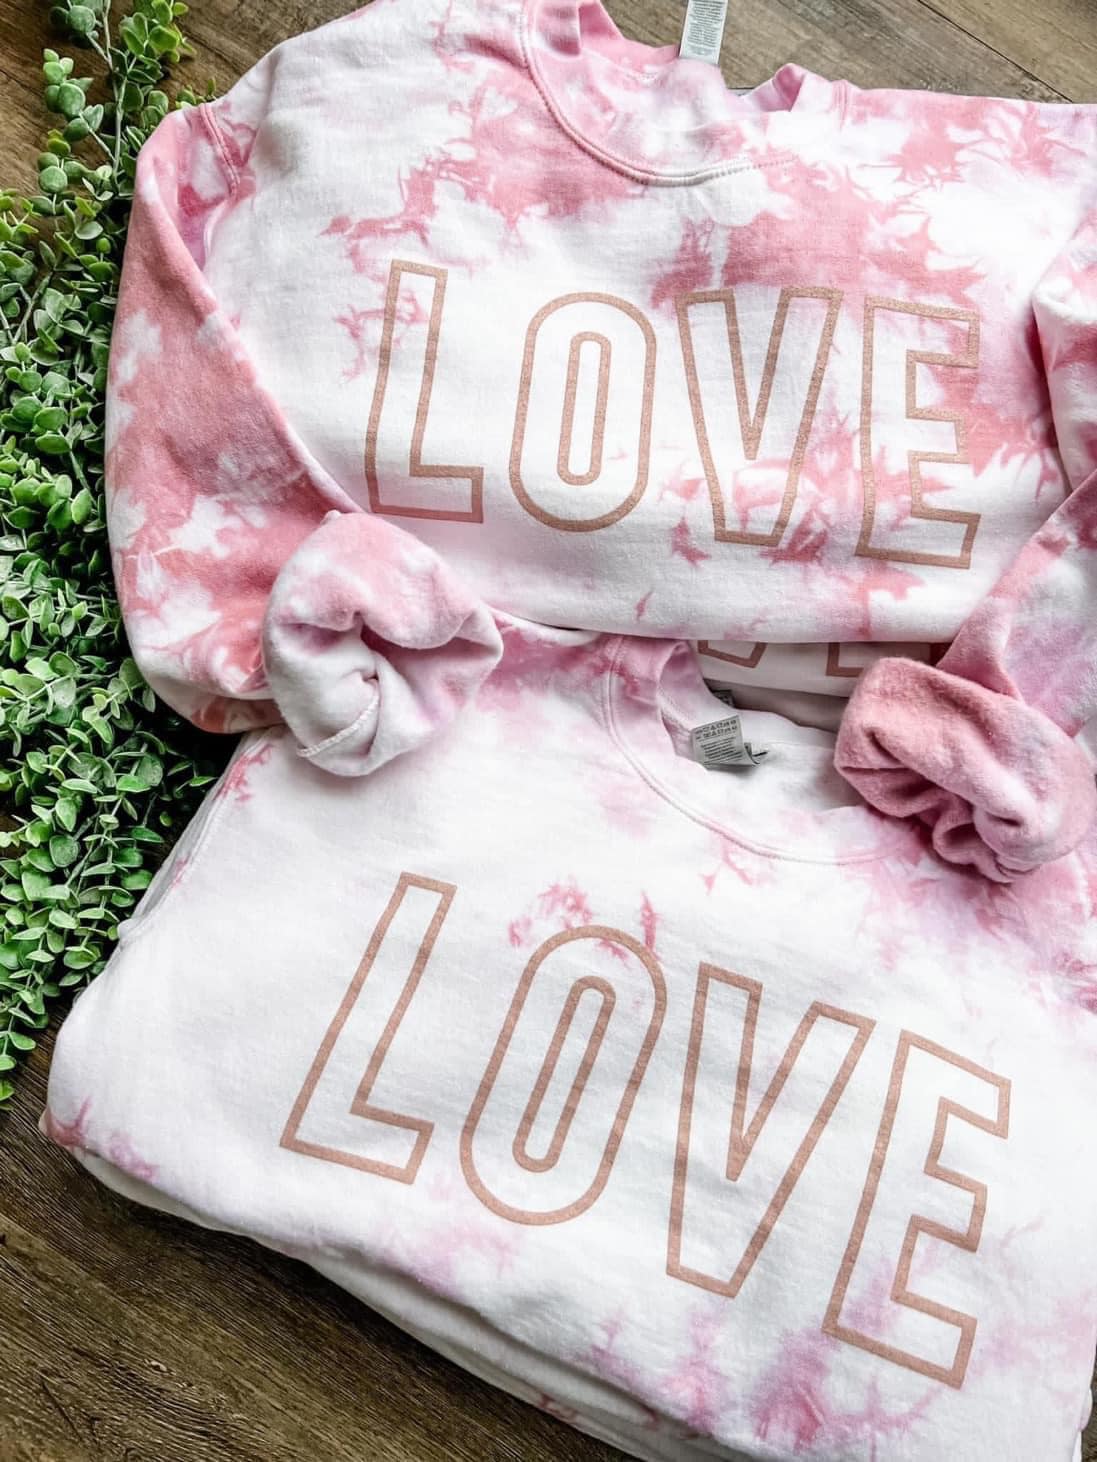 pink sweater that says "LOVE"